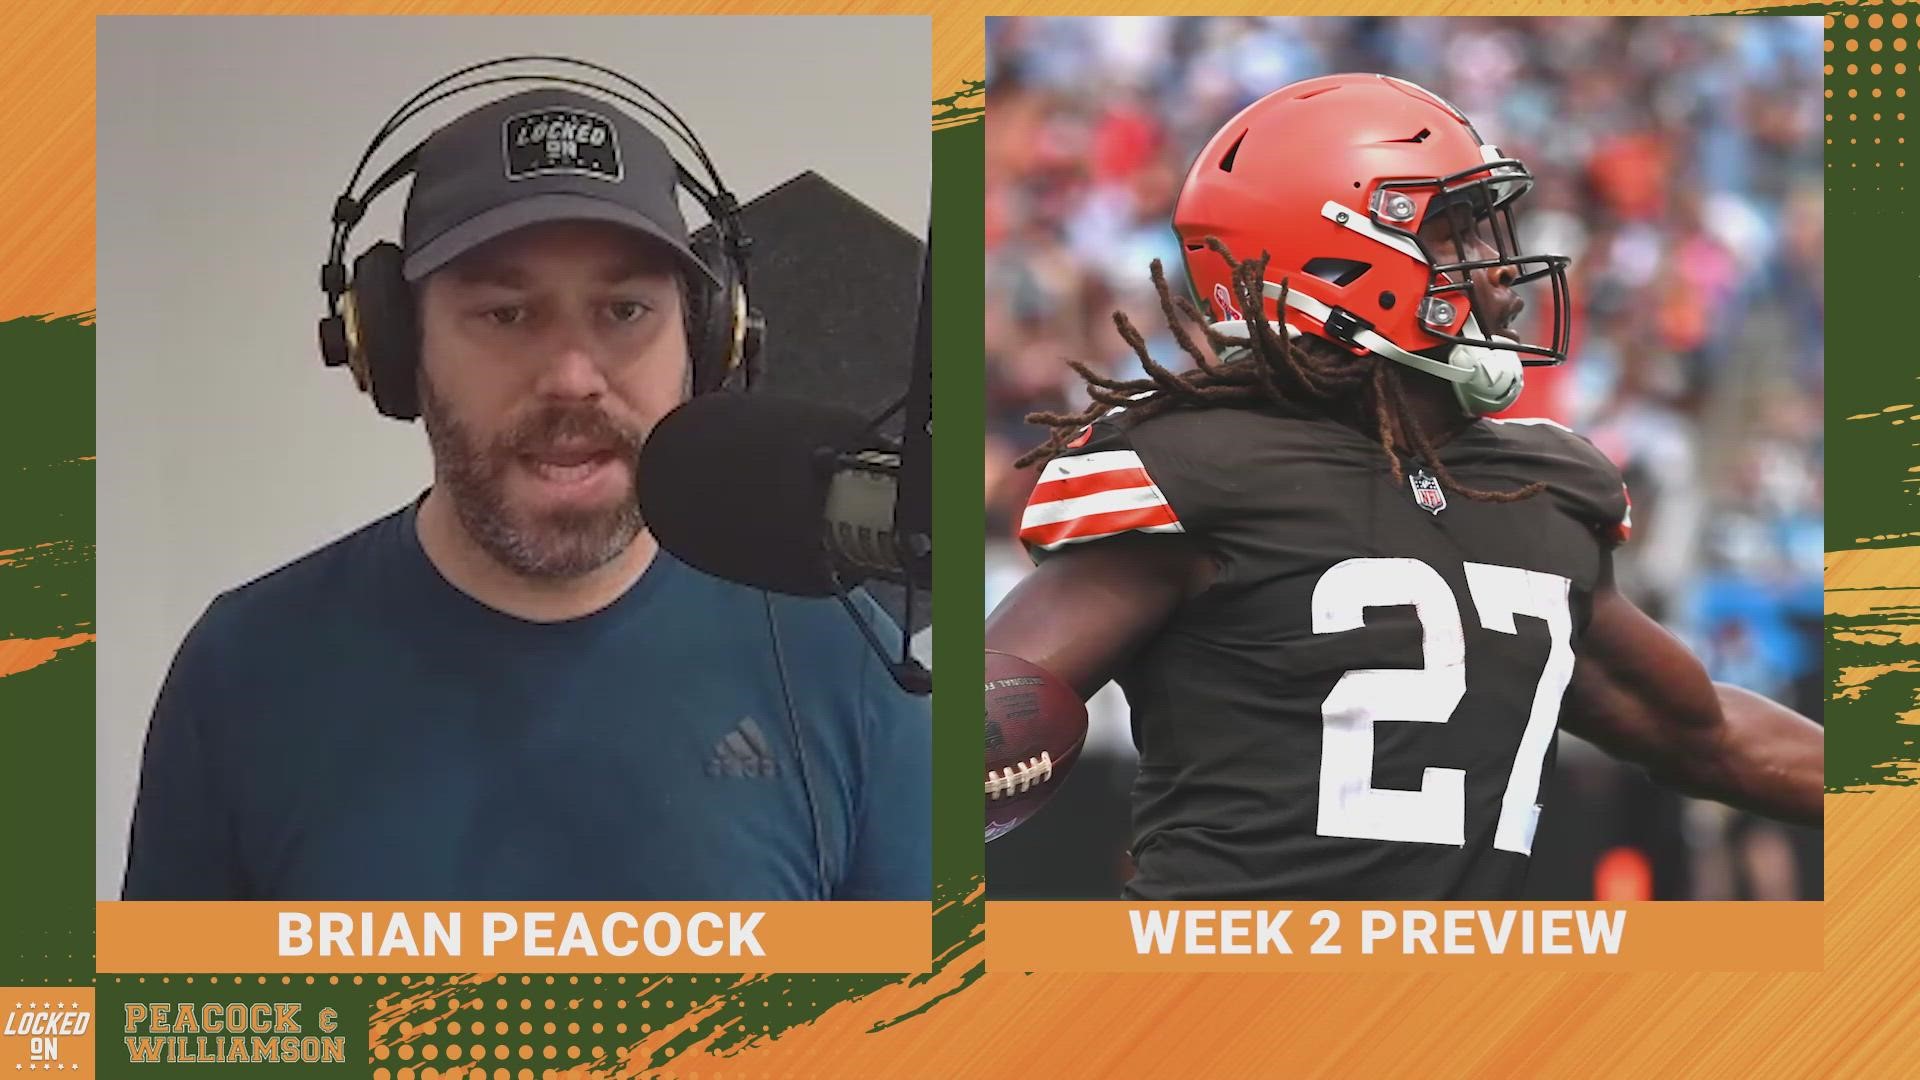 Brian Peacock and Matt Williamson preview week two of the NFL season, plus a review of Thursday night's game between the Chargers and the Chiefs.